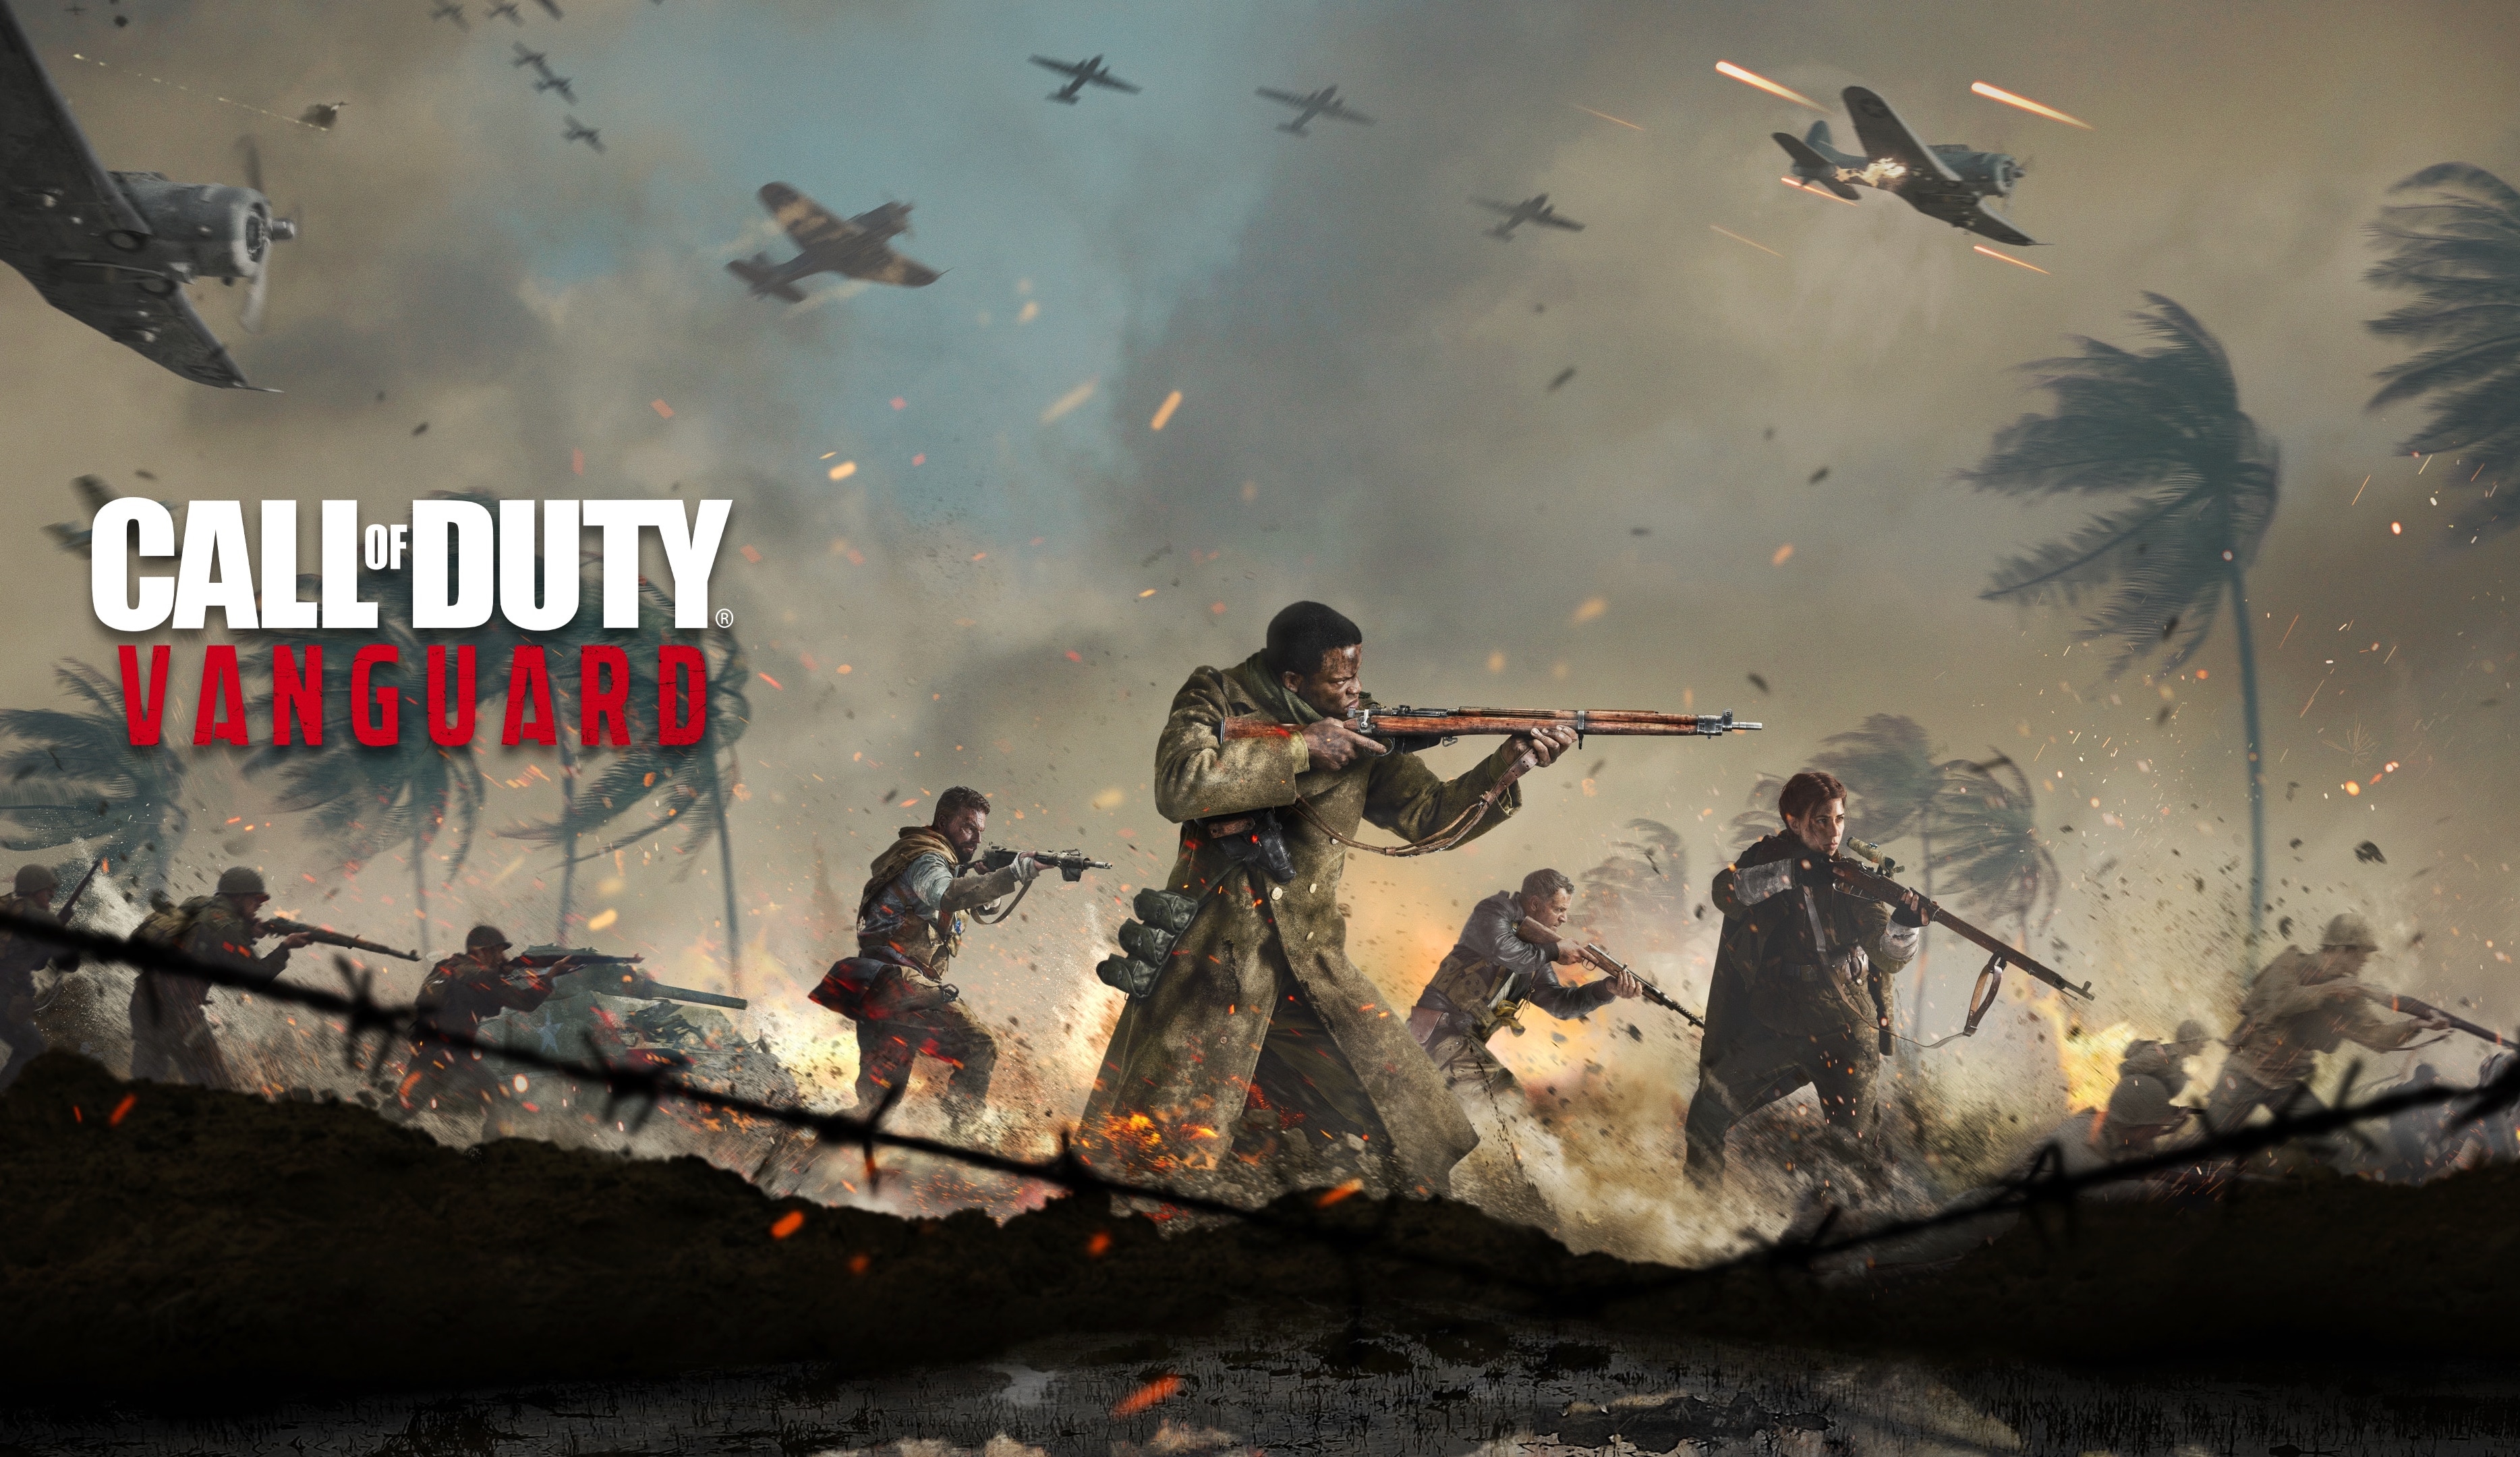 call of duty 1 pc download gog